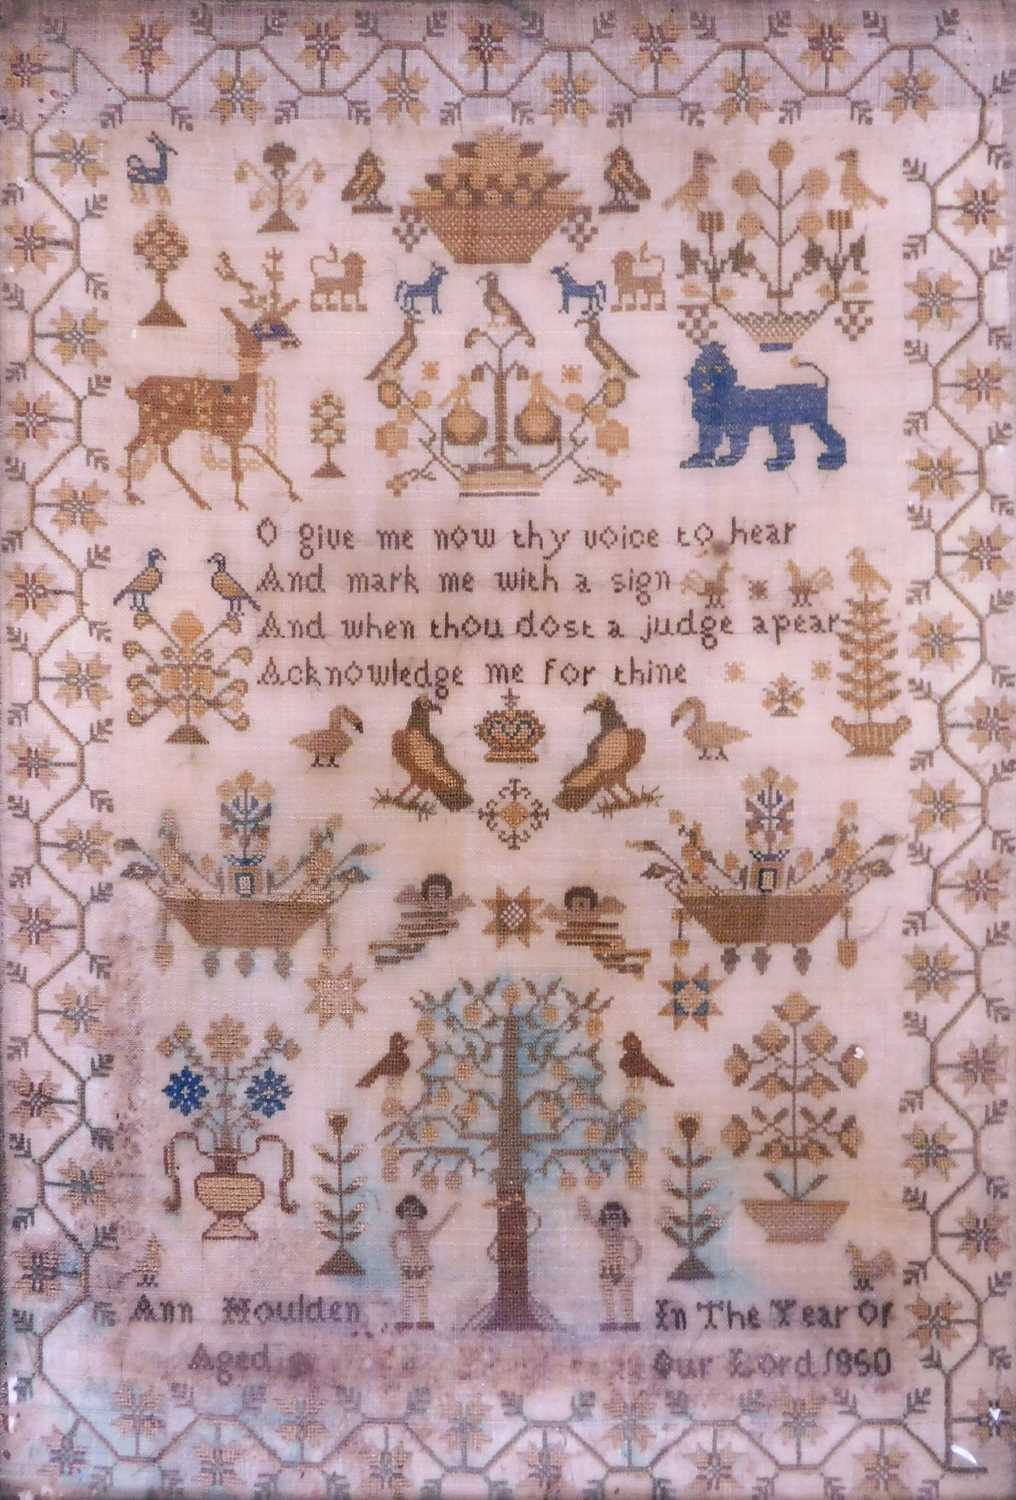 A mid 19th century needlwork sampler, with religious text, flora and fauna decoration, named 'Ann